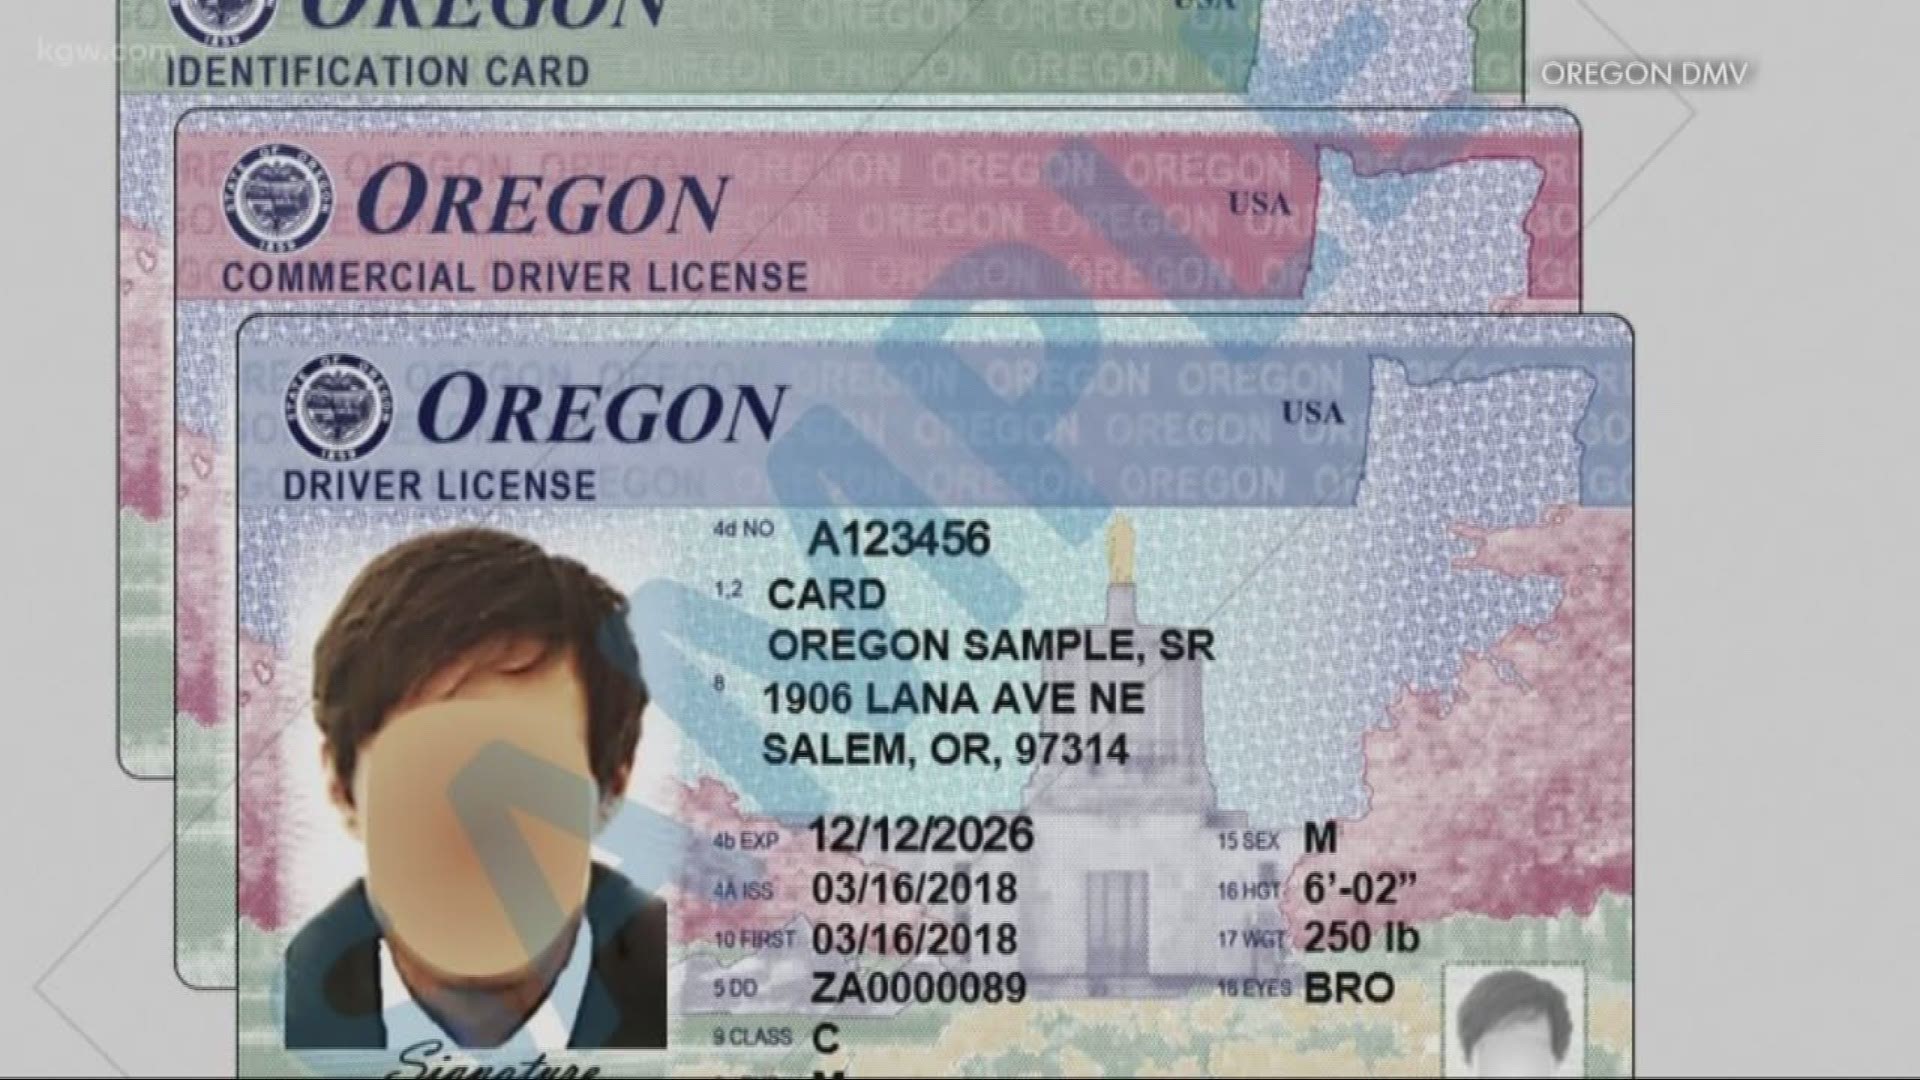 can illegal immigrants get a driver's license in oregon